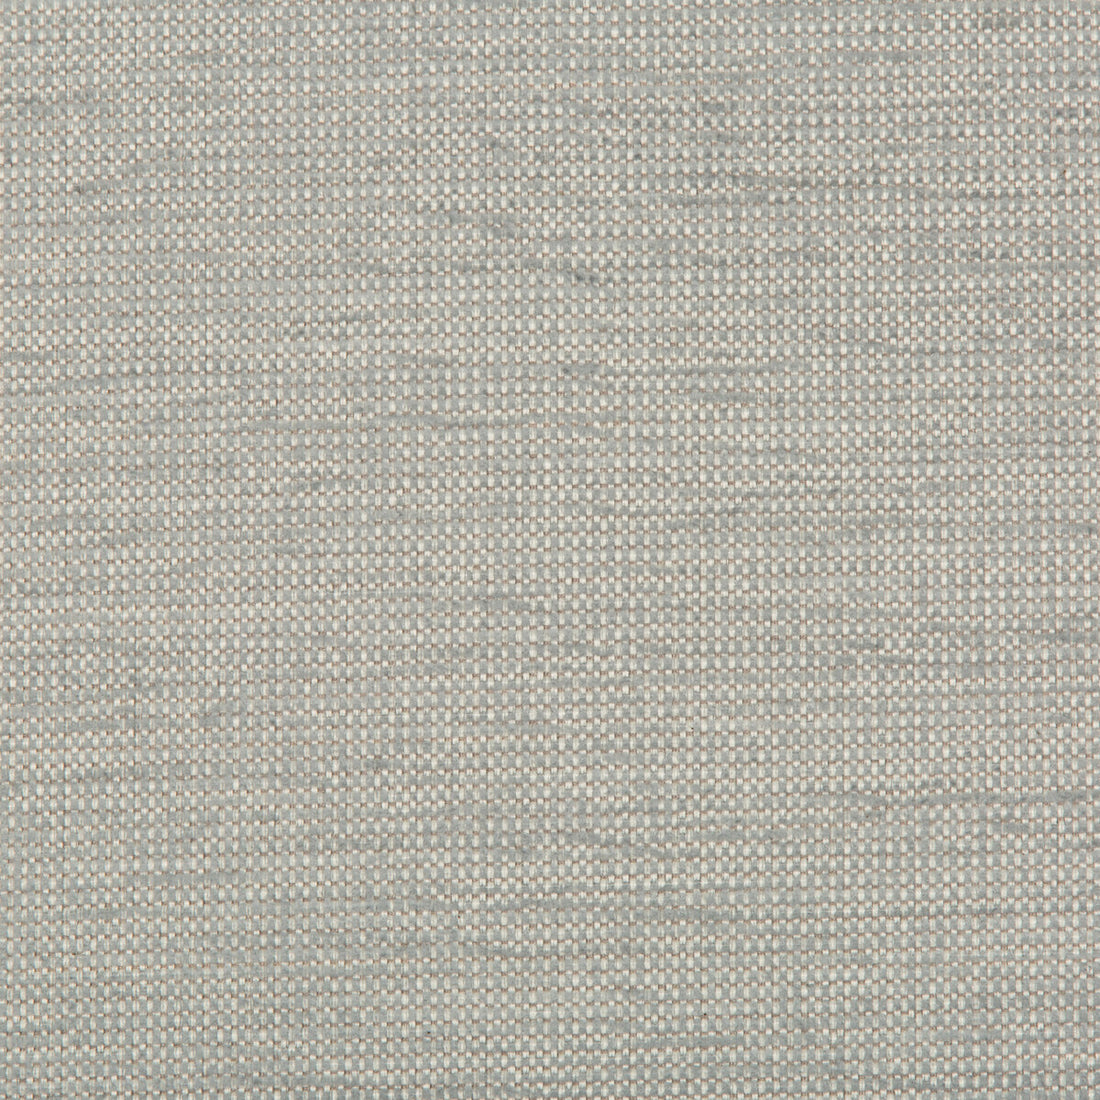 Cato fabric in moonstone color - pattern 32931.11.0 - by Kravet Contract in the Chesapeake collection